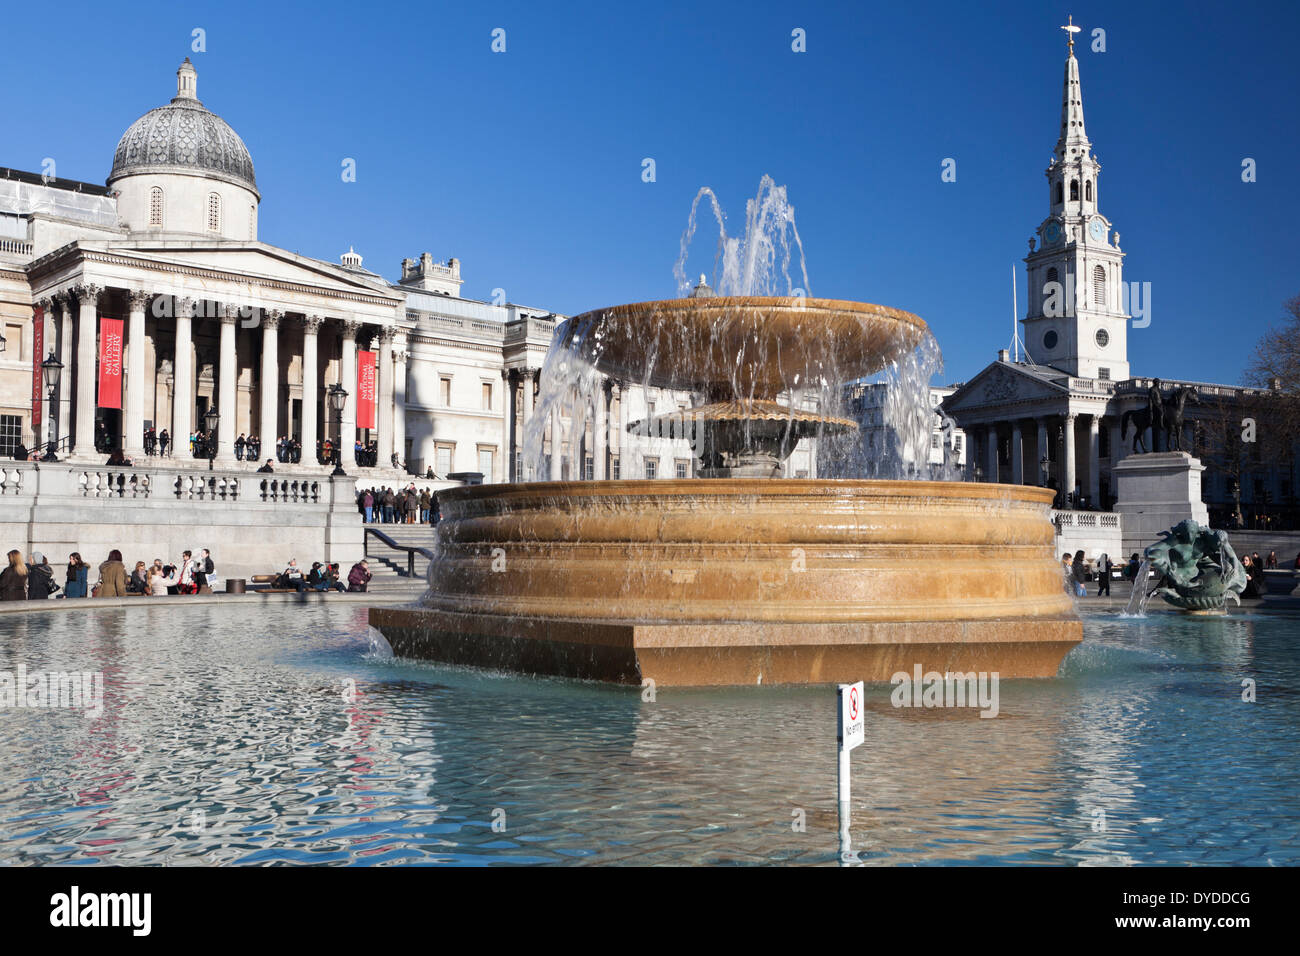 Fountain with the National Gallery and St Martin in the Fields church in the background. Stock Photo